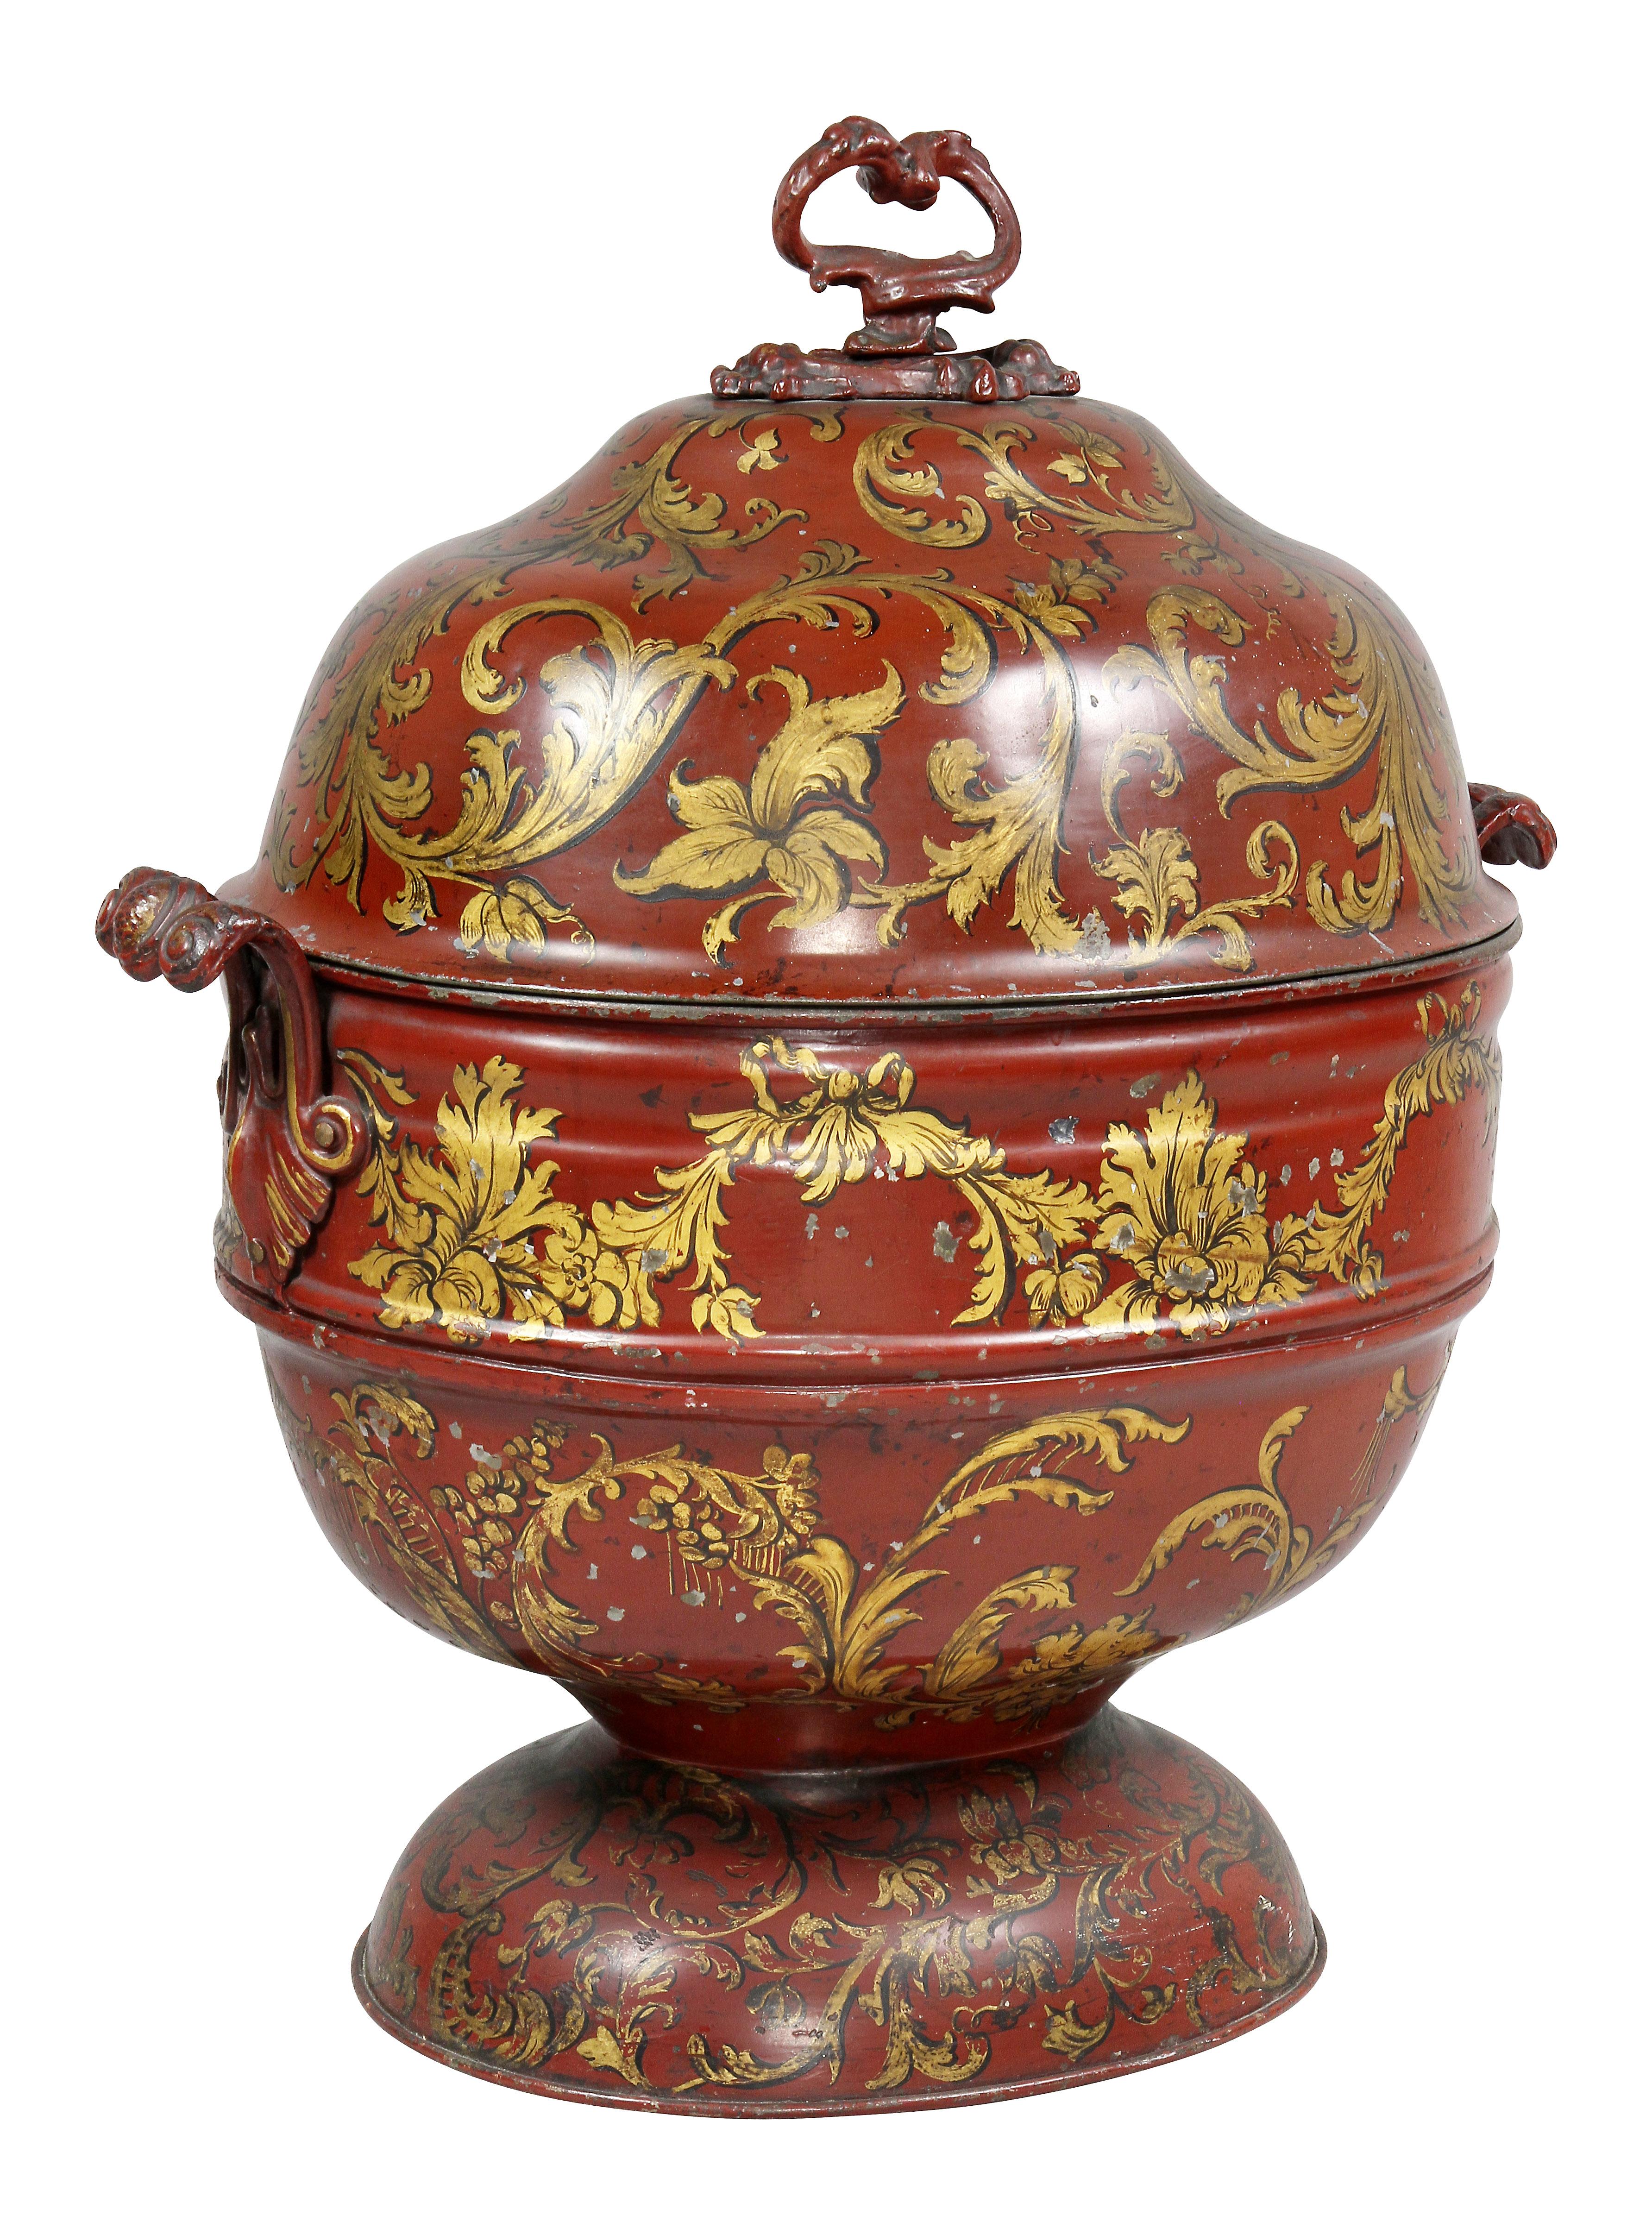 With oval domed cover and handle and conforming bowl section, oval footed base, scroll handles, gilt leaf decoration overall.